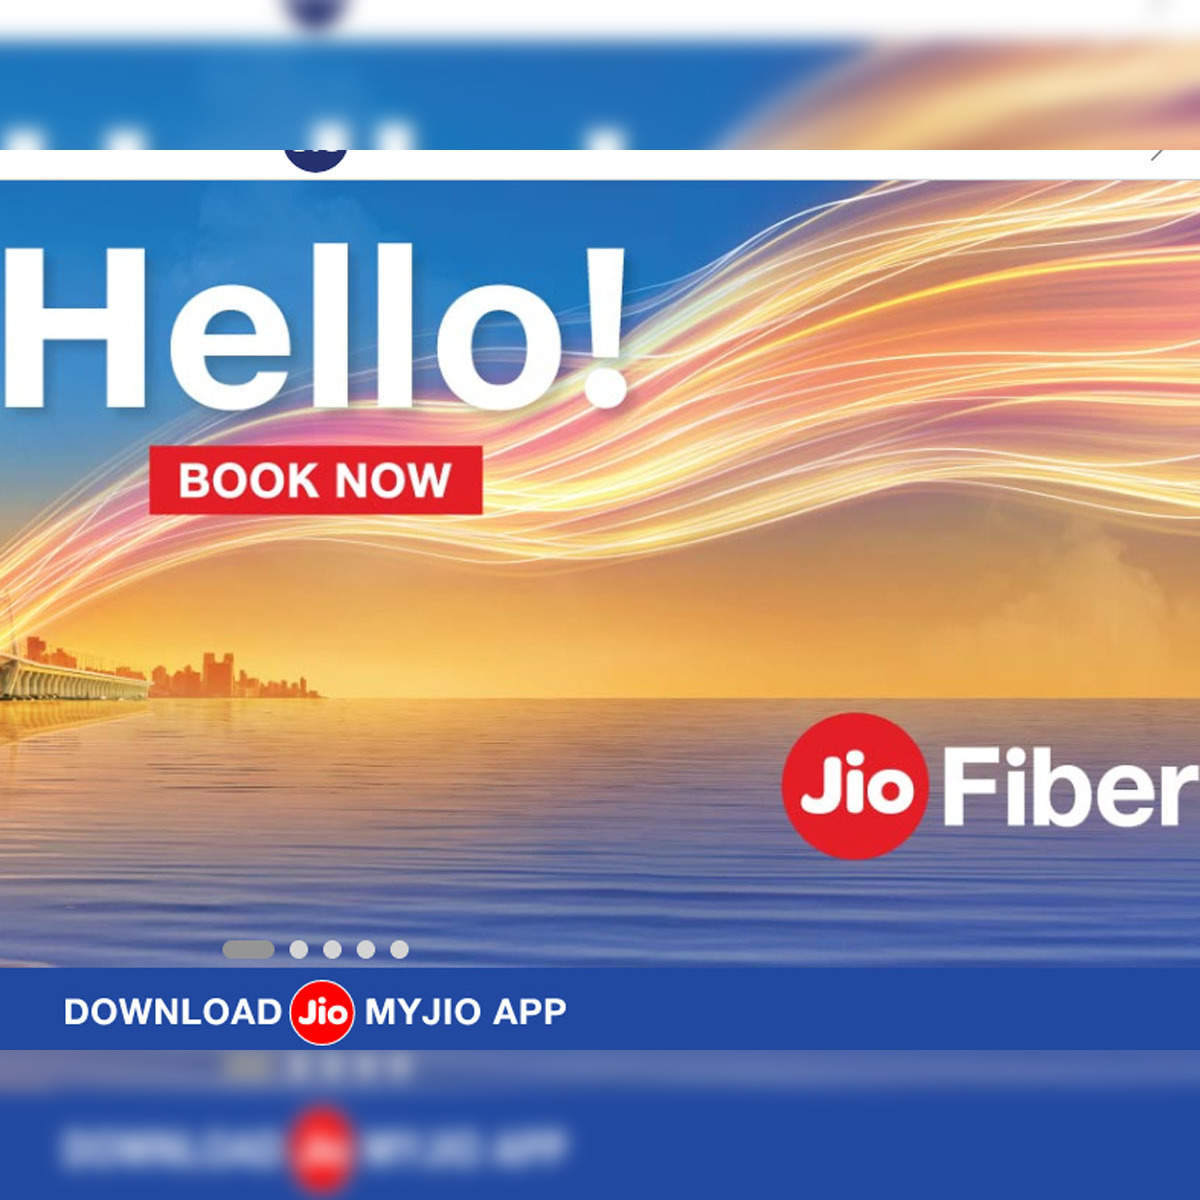 Jio Fiber Plans: Here's how Reliance Jio's broadband fiber plans fare  against other companies | Business Insider India